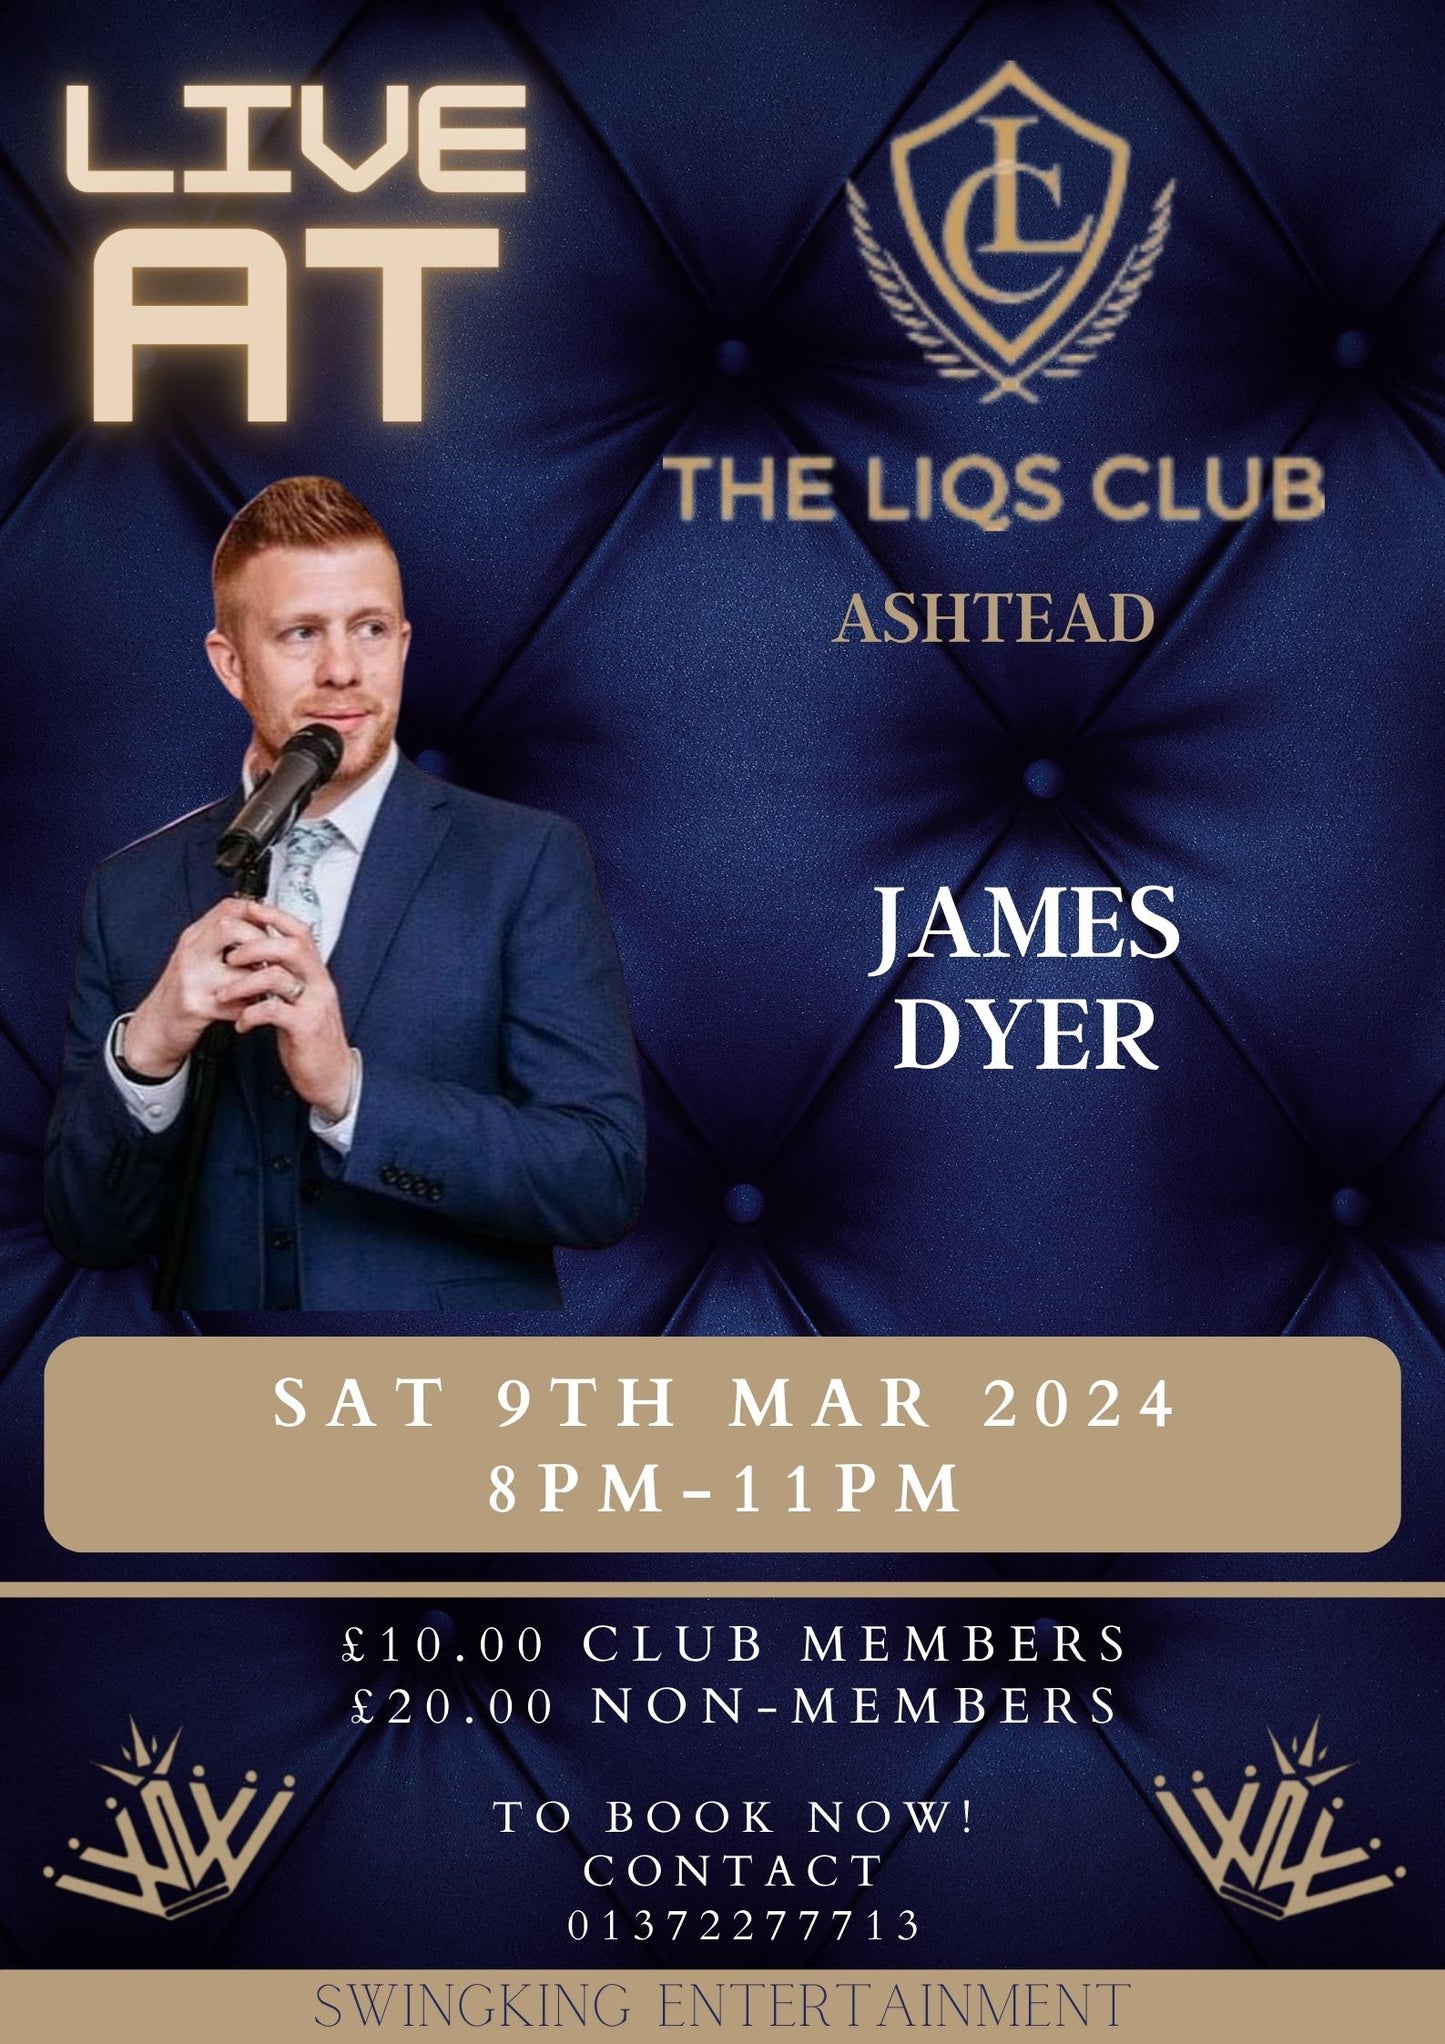 Live Music with James Dyer - Saturday 9th March 2024